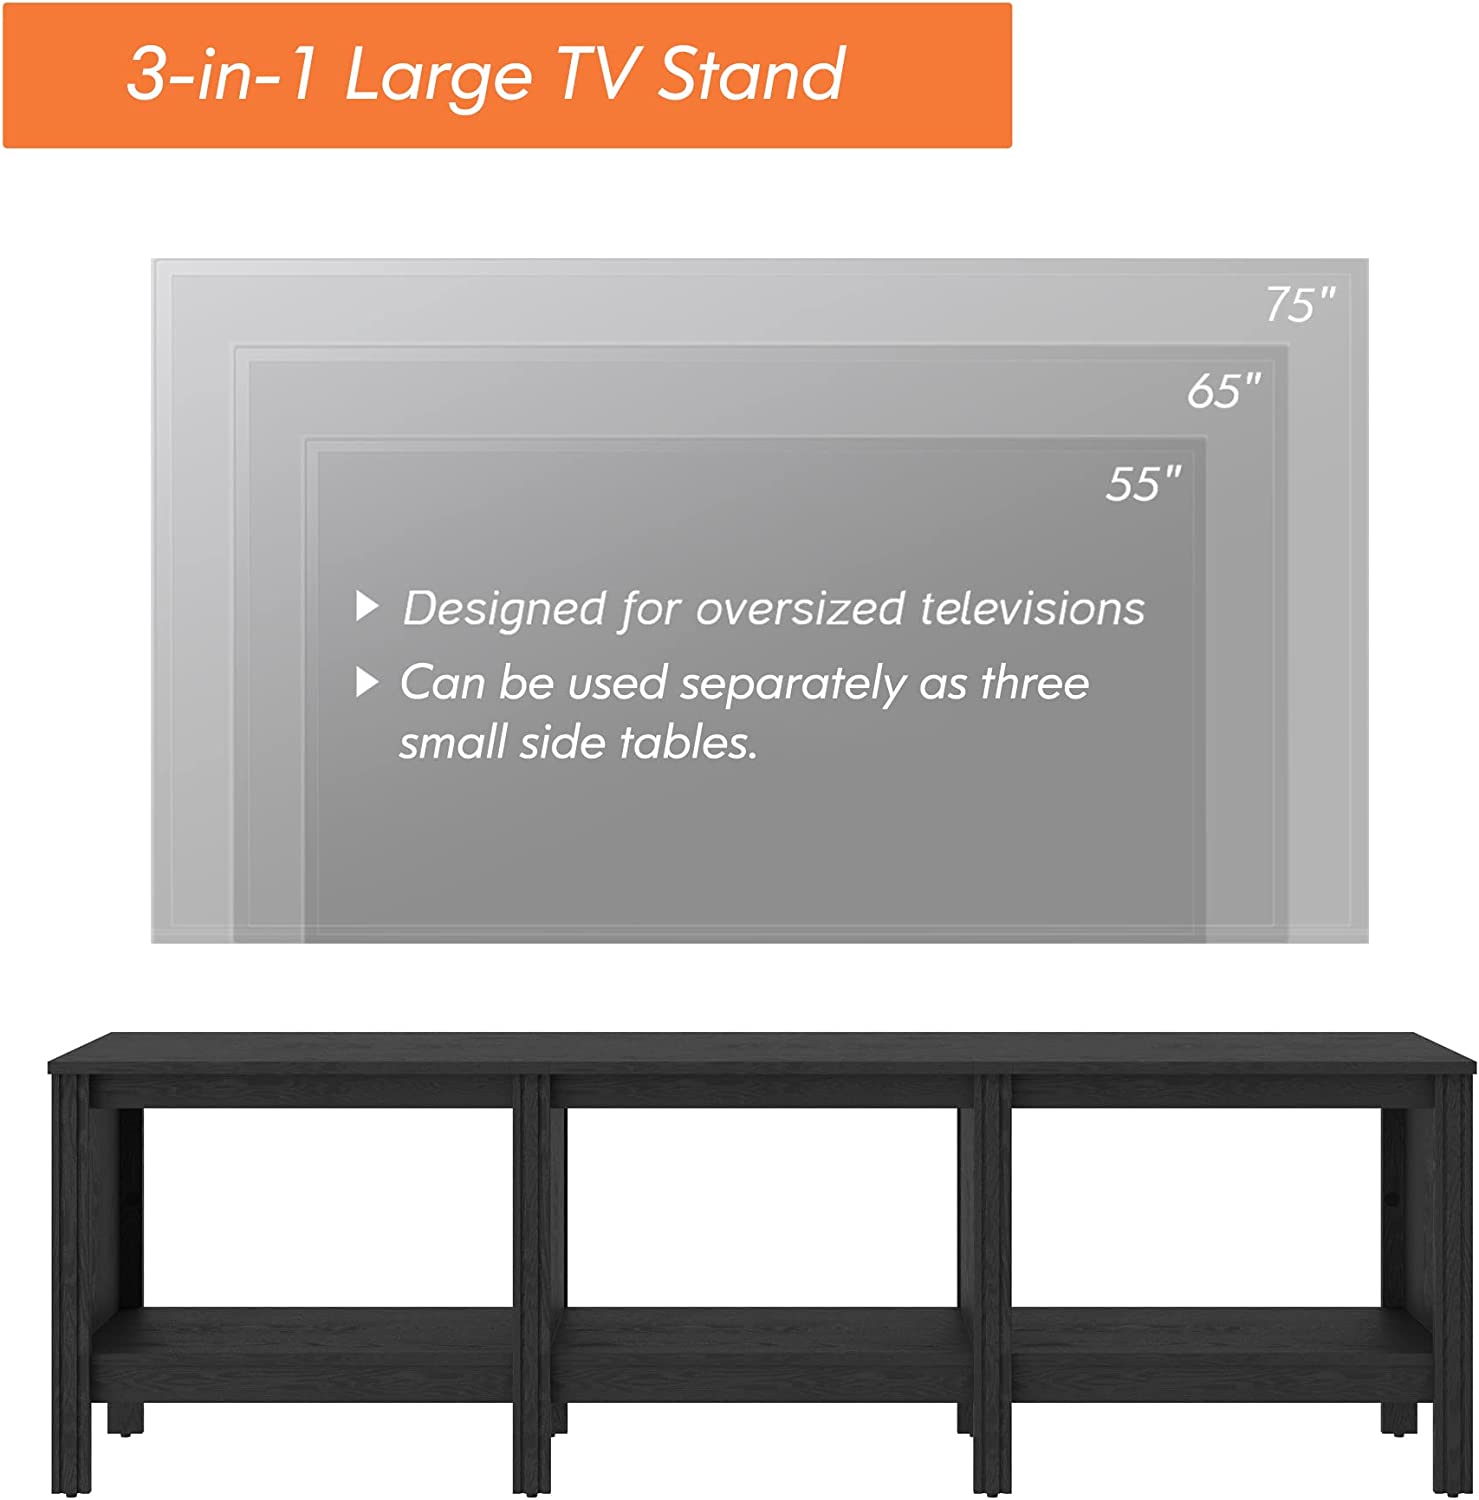 WAMPAT 70.8" Farmhouse TV Stand for 75 Inch TV, Wood Entertainment Center for 70 65 55 inch TV, Black